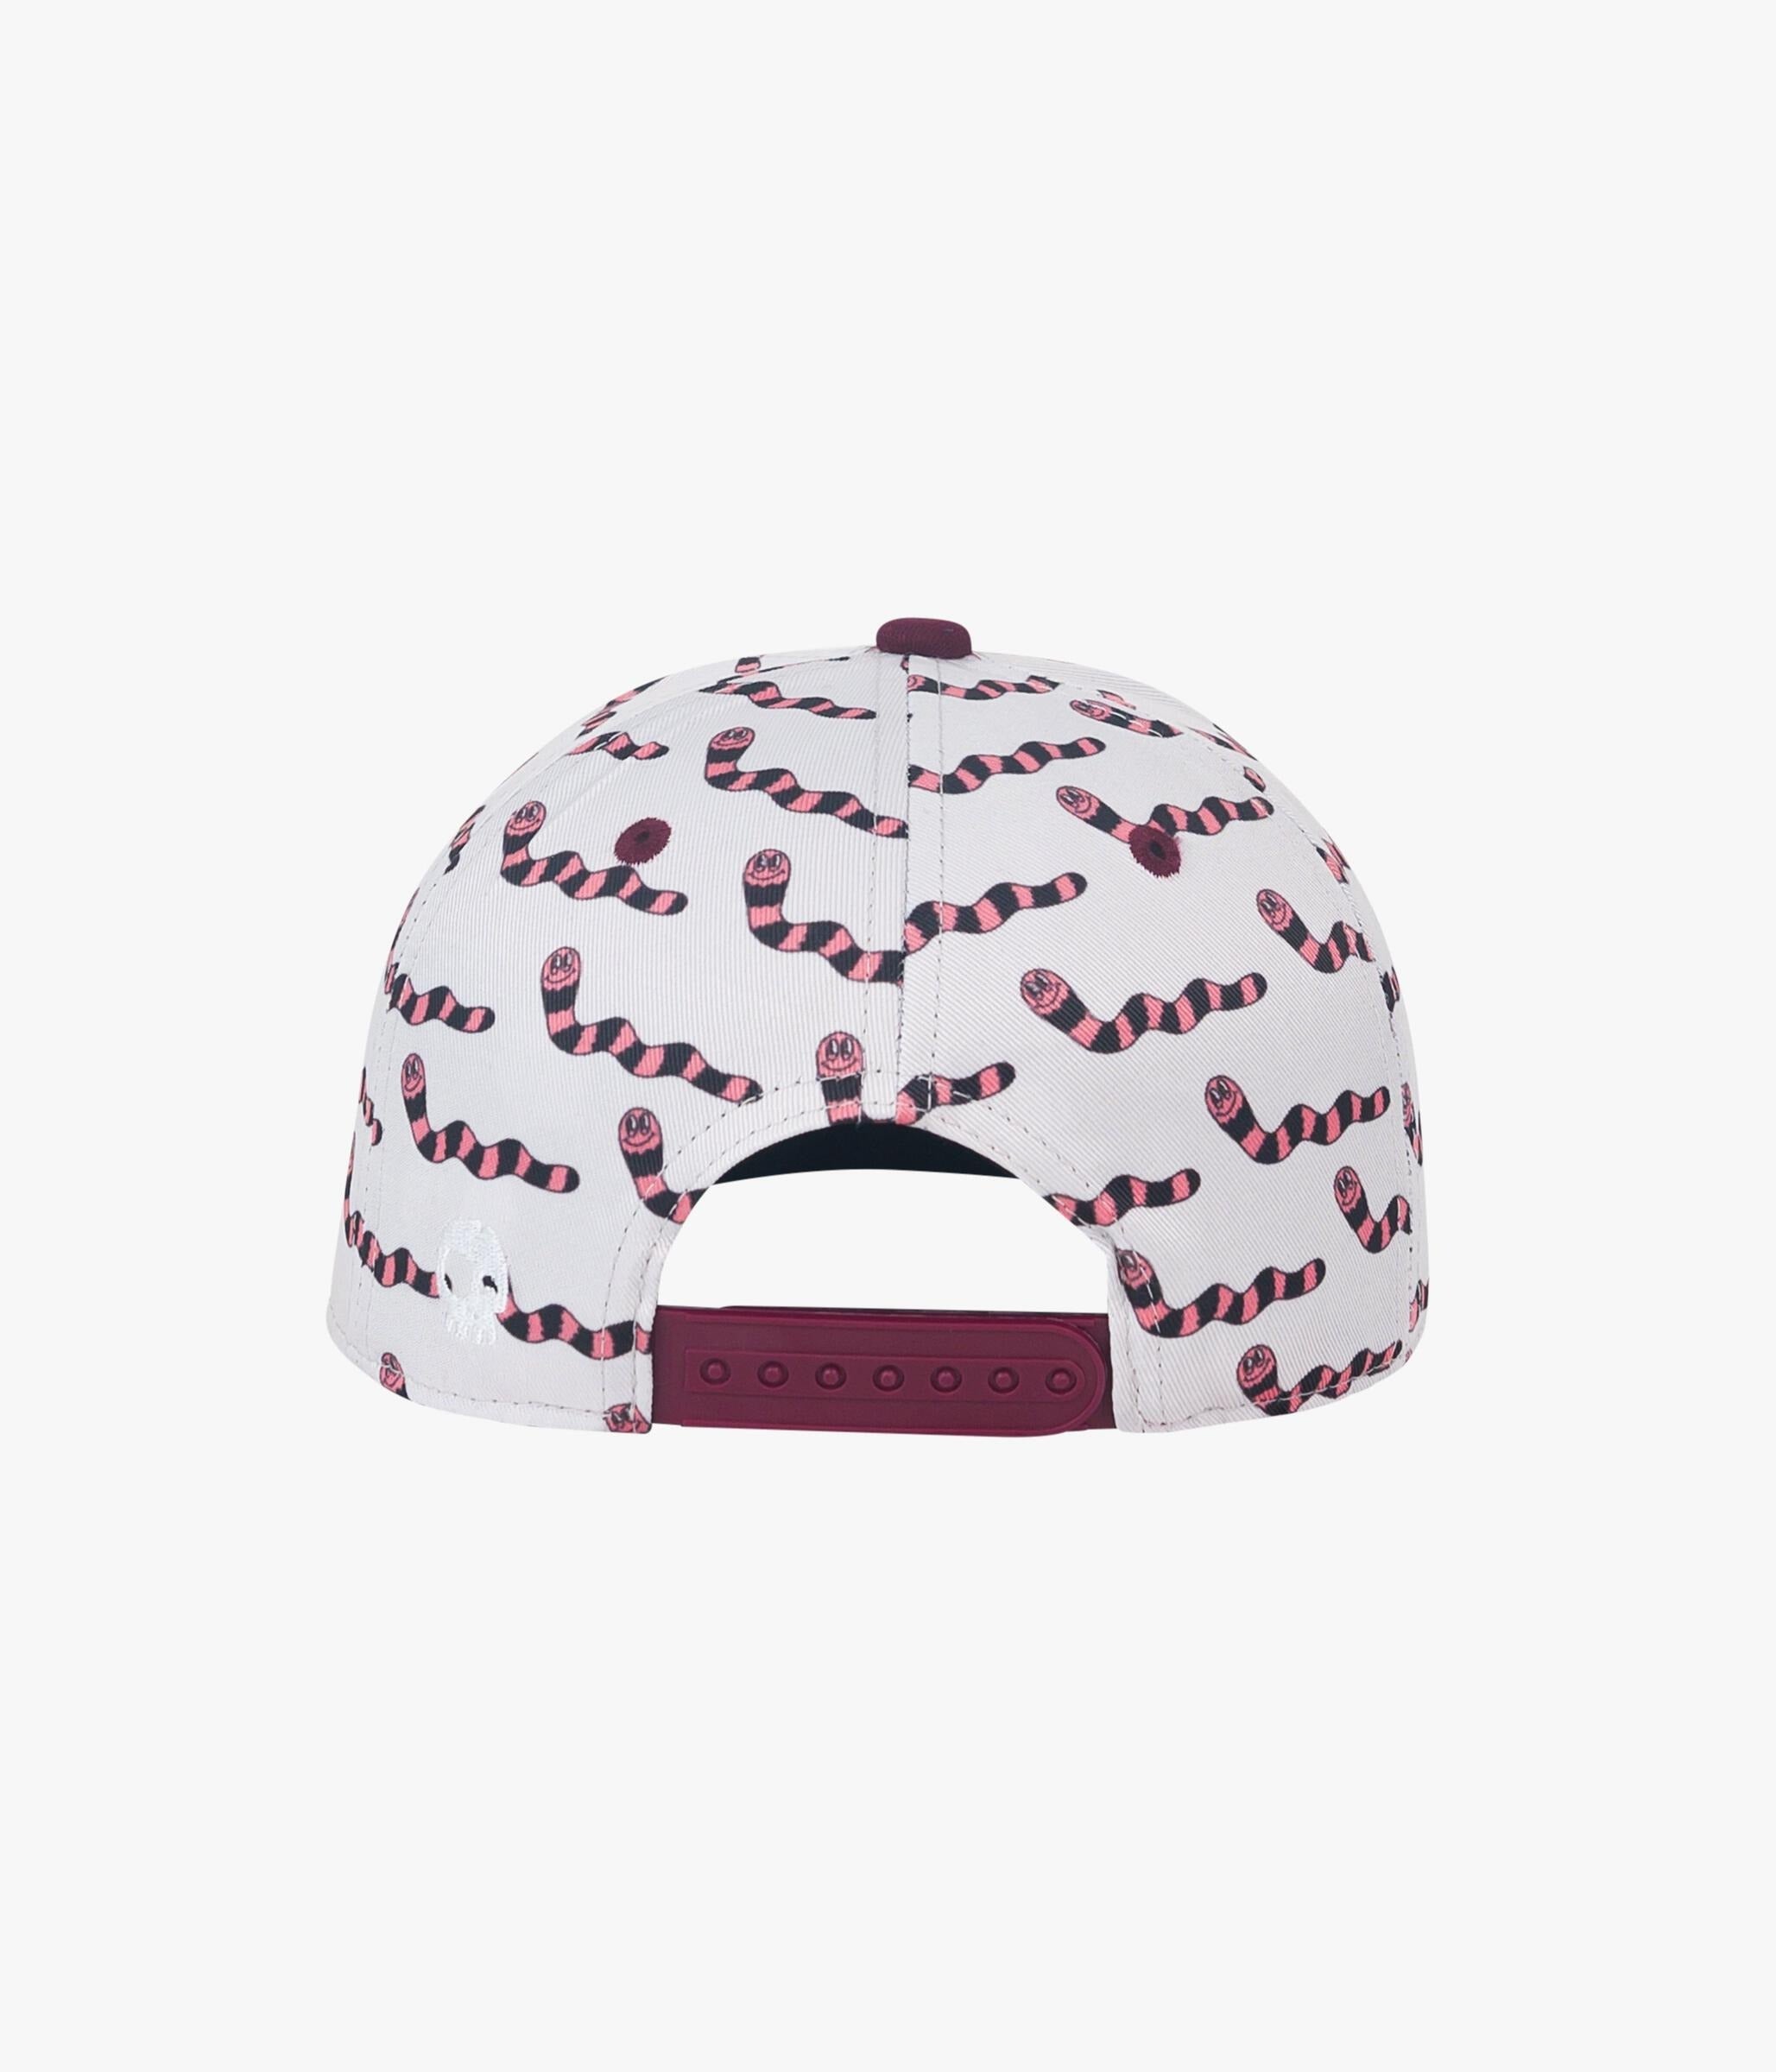 Headster Worms Snapback - Mountain Kids Outfitters